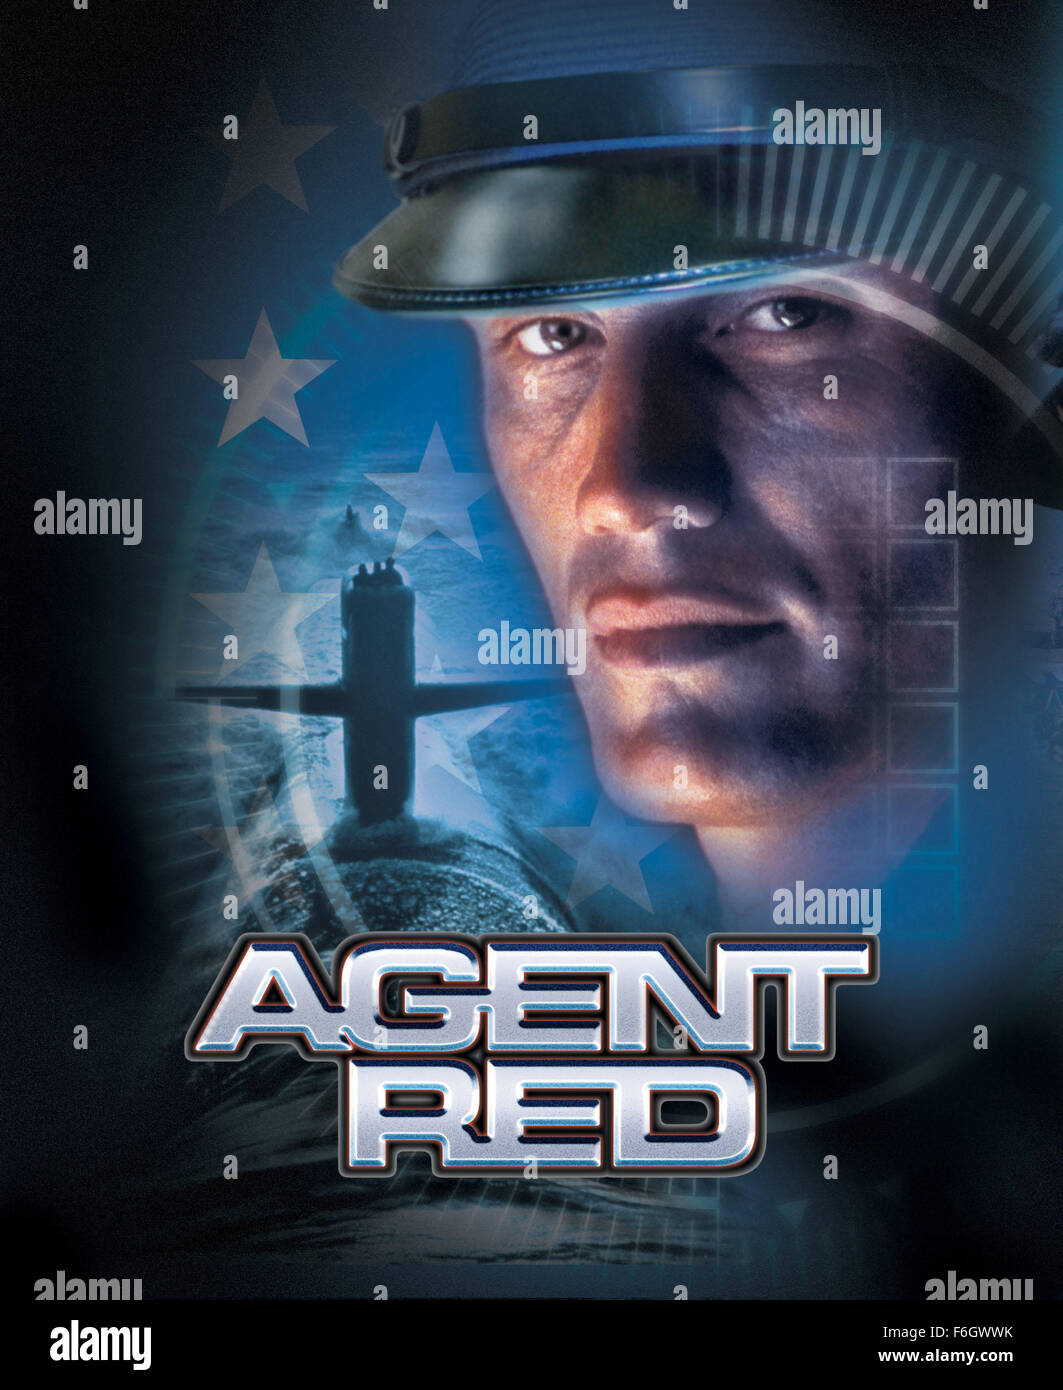 RELEASE DATE: April 10, 2001. MOVIE TITLE: Agent Red. STUDIO: Phoenician Entertainment. PLOT: The Cold War has ended, and the Russian government has decided get rid of a deadly bioweapon sample by returning it to the United States, from whom it had been stolen. Officer Hendricks has been assigned to pick up the virus sample and escort it back to America via submarine. Along the way, however, a gang of terrorists hijack the sub in an attempt to launch a bioweapon attack on both New York and Moscow. Can Hendricks stop them before it's too late? PICTURED: DOLPH LUNDGREN as Matt Hendricks. Stock Photo